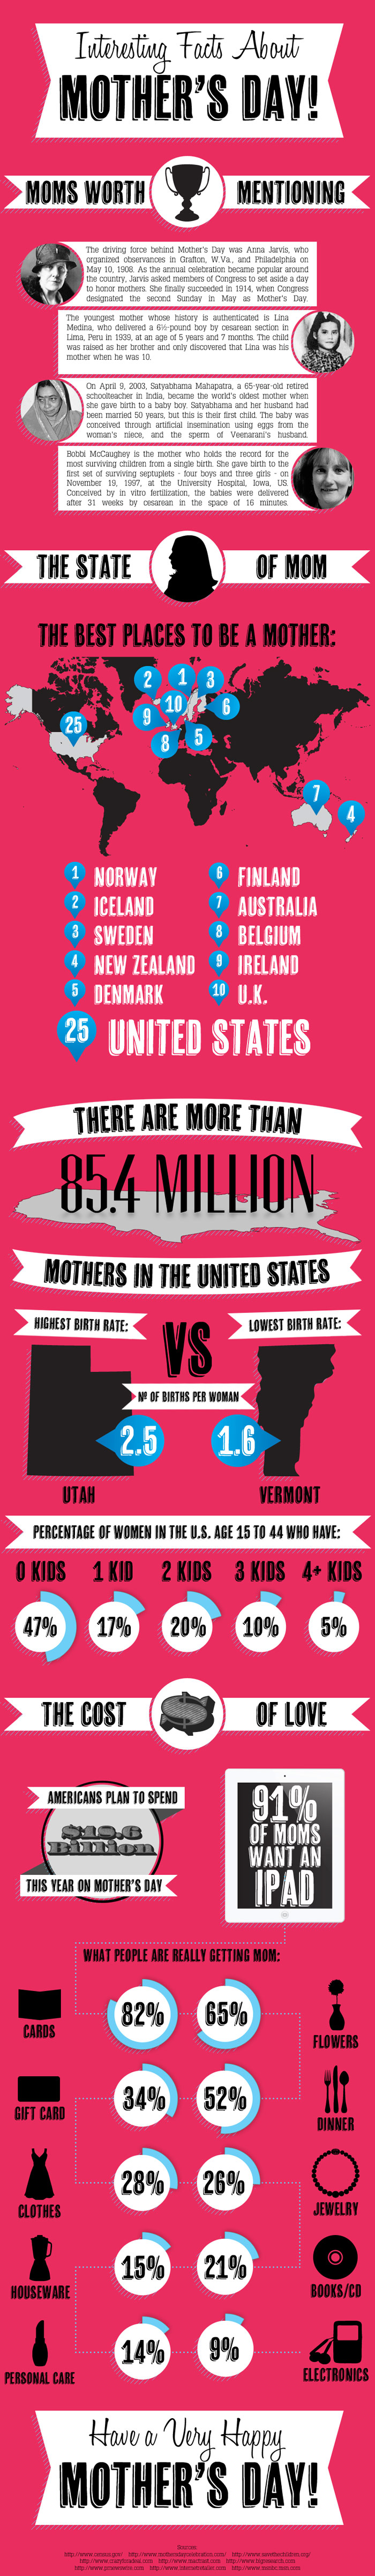 Mothers-Day-infographic